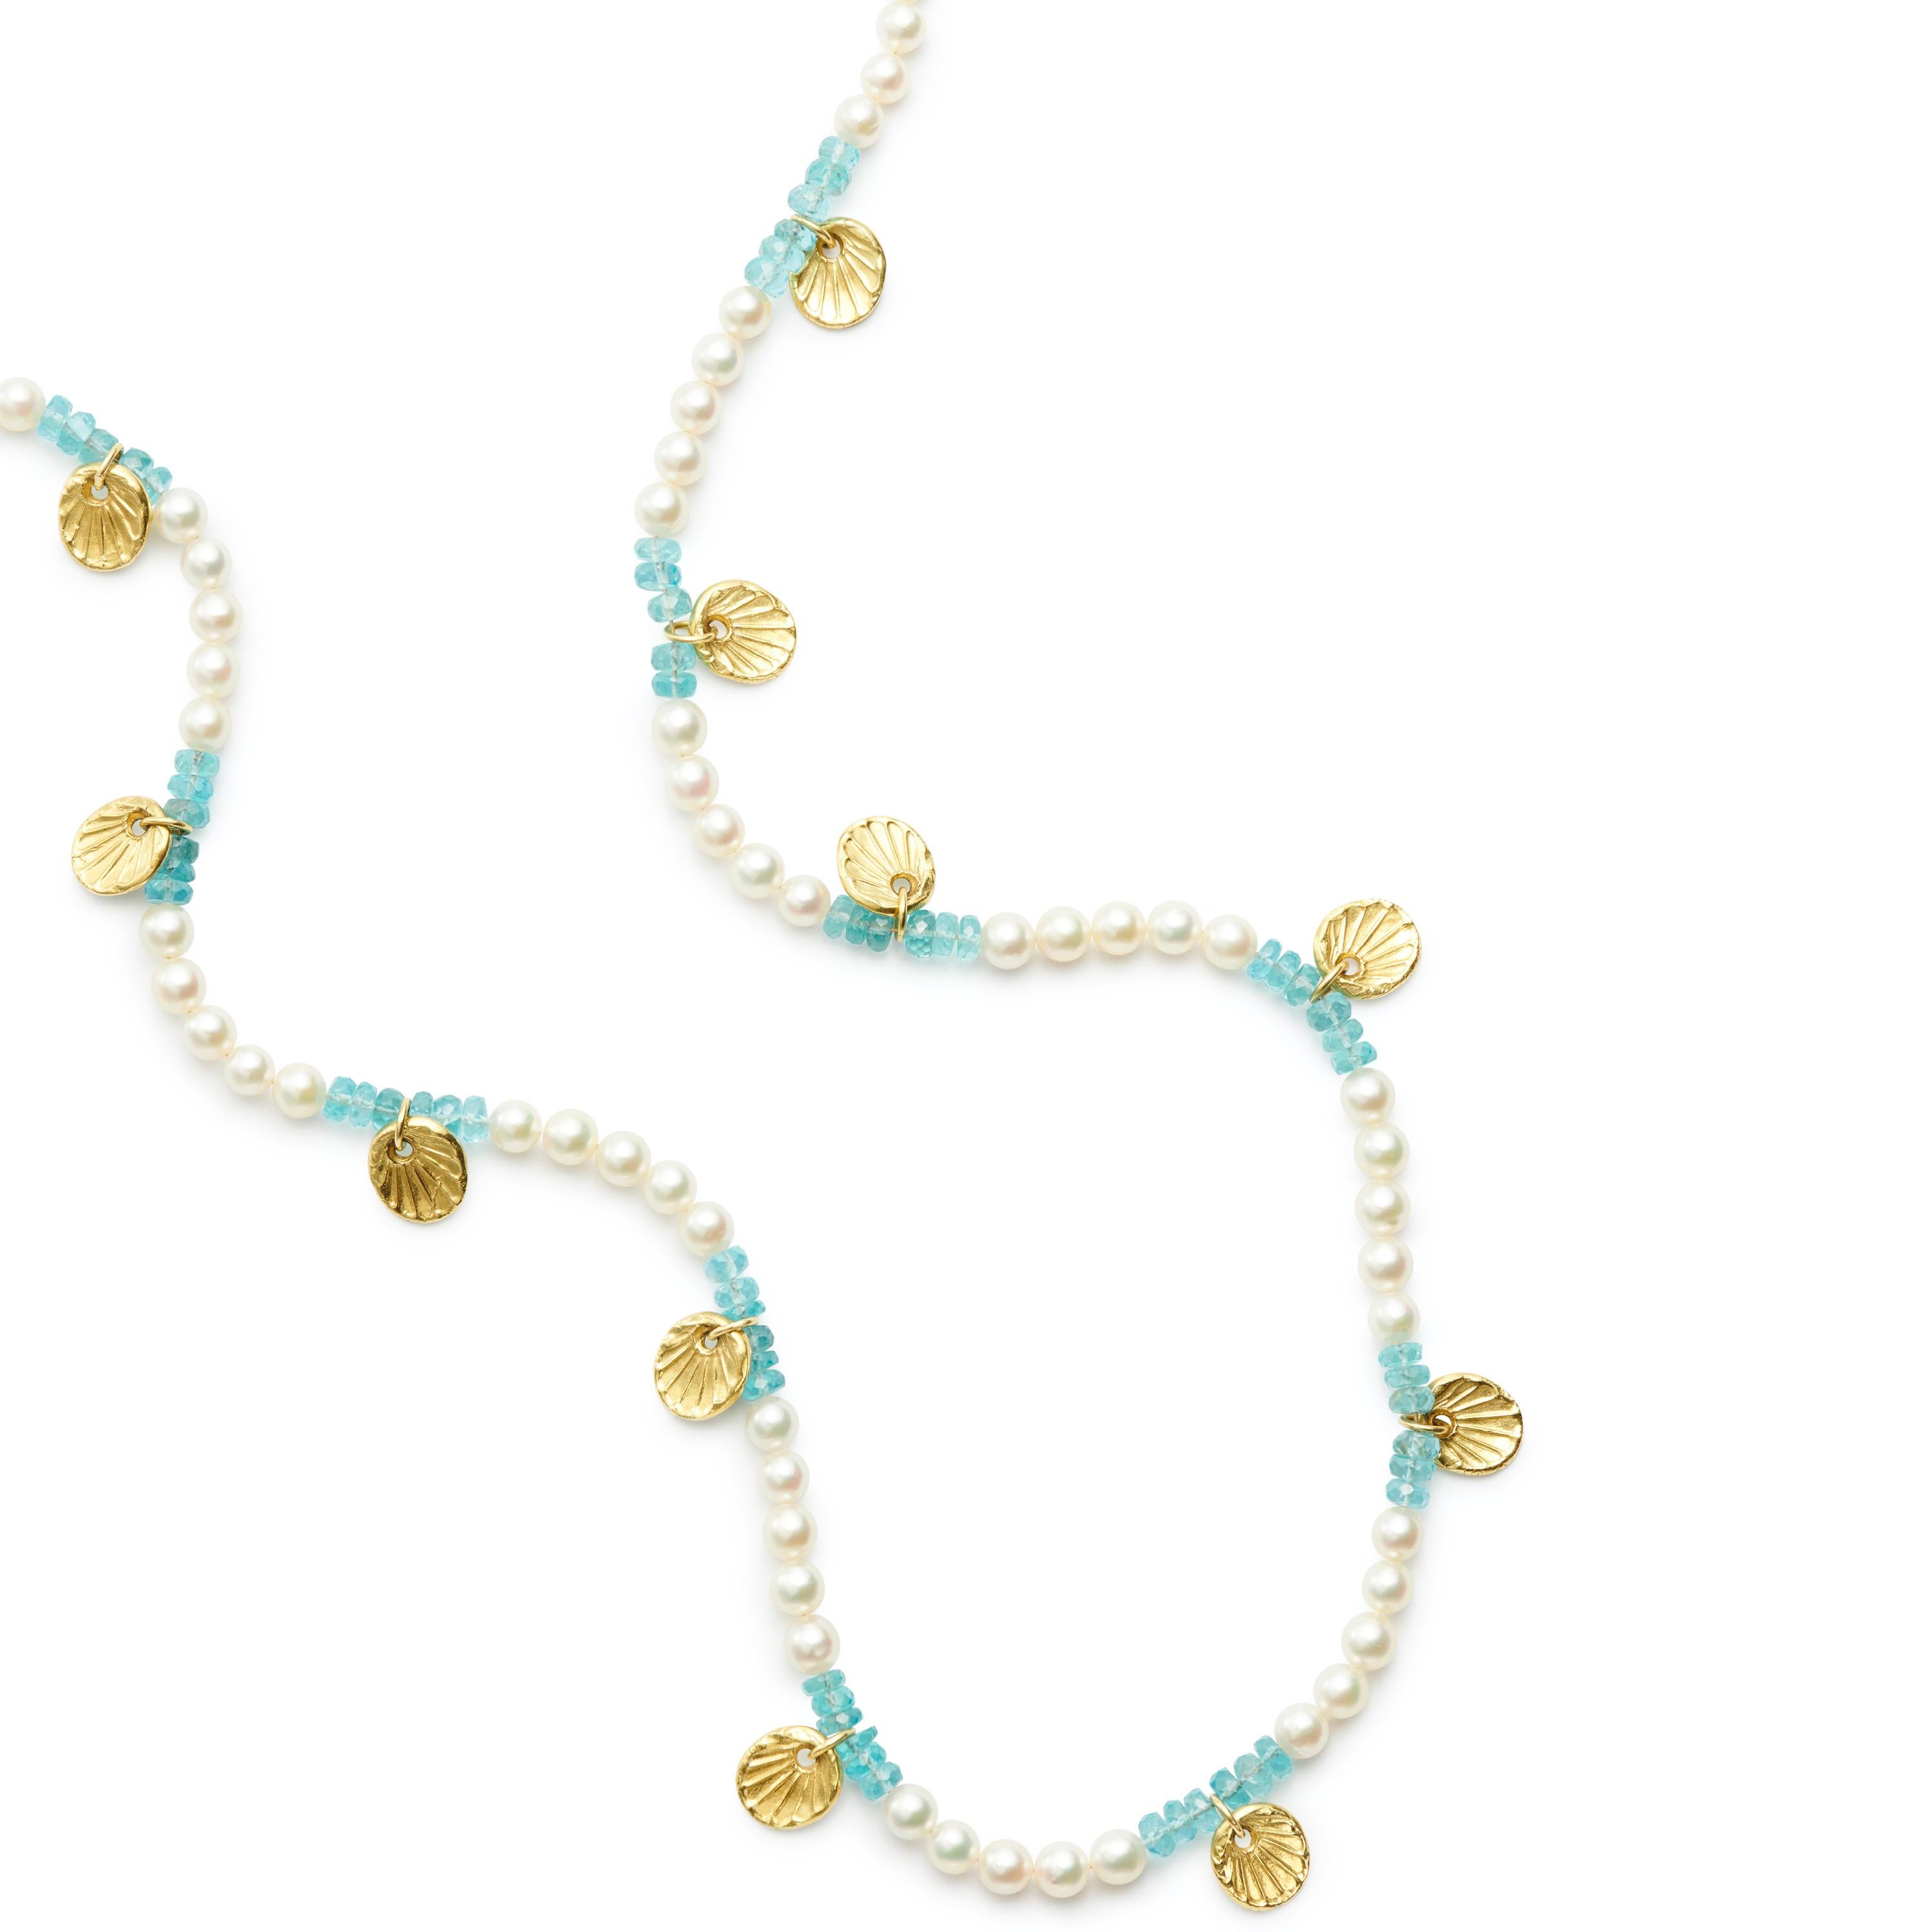 A fancy and fun 26-inch Freshwater Pearl and faceted Apatite Bead Necklace accented with 18 Karat Gold Scallop Shell charms. A sweet summer piece to wear with everything from shorts to sundresses. Finished with an 18 Karat Gold clasp. Match up with